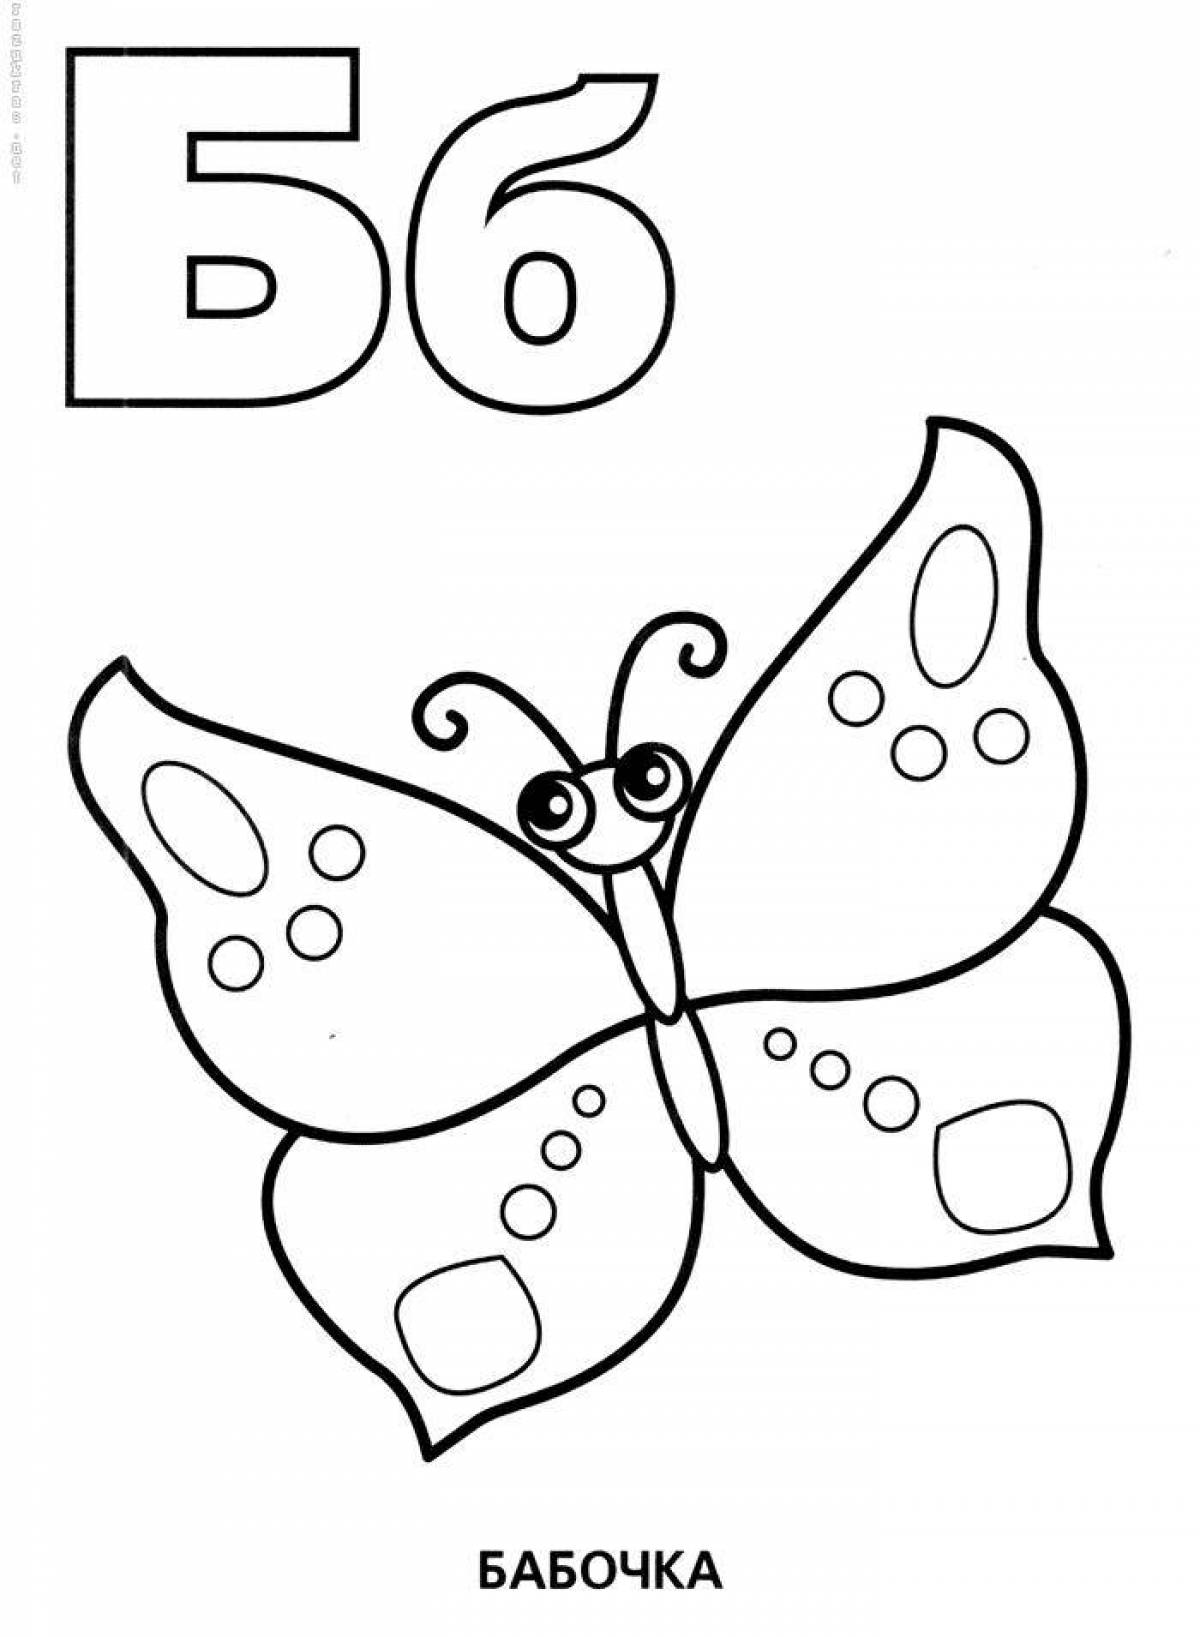 A fascinating coloring book with the alphabet for children 4-5 years old